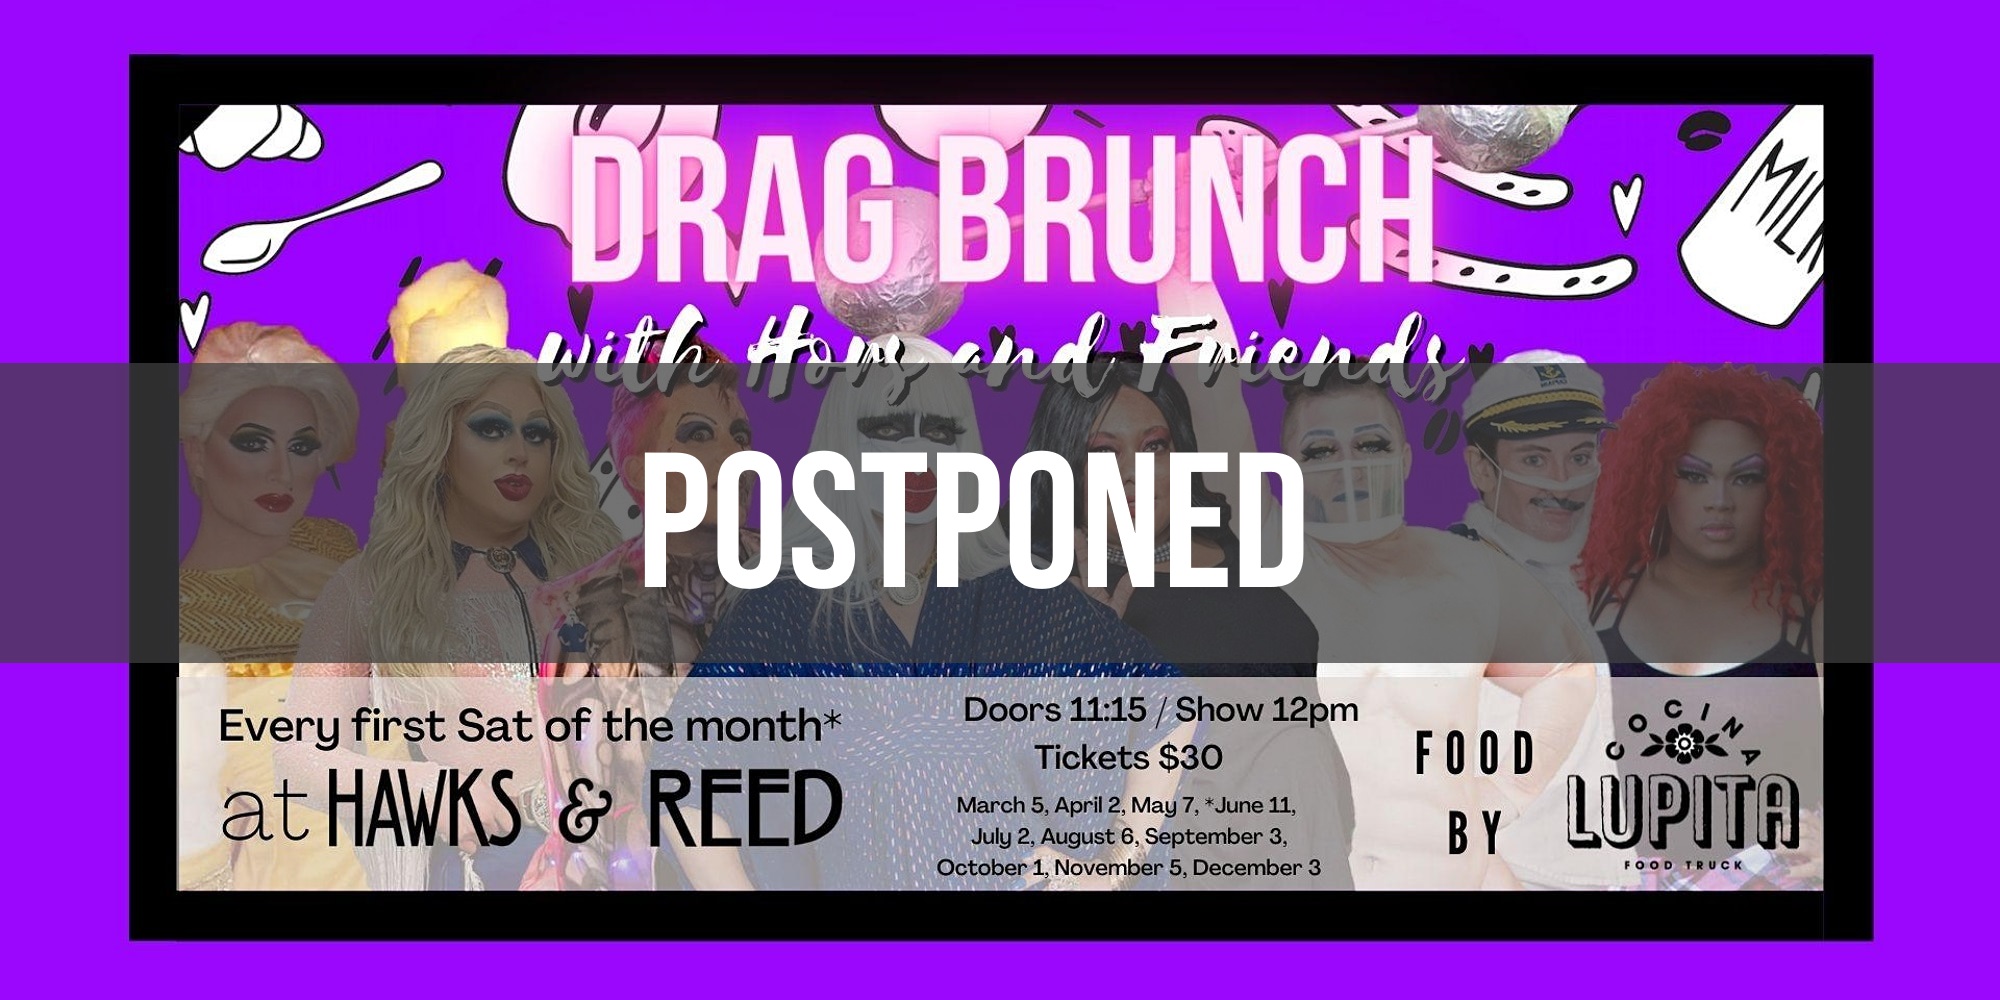 POSTPONED: Drag Brunch with Hors and Friends at Hawks and Reed – Food by Cocina Lupita